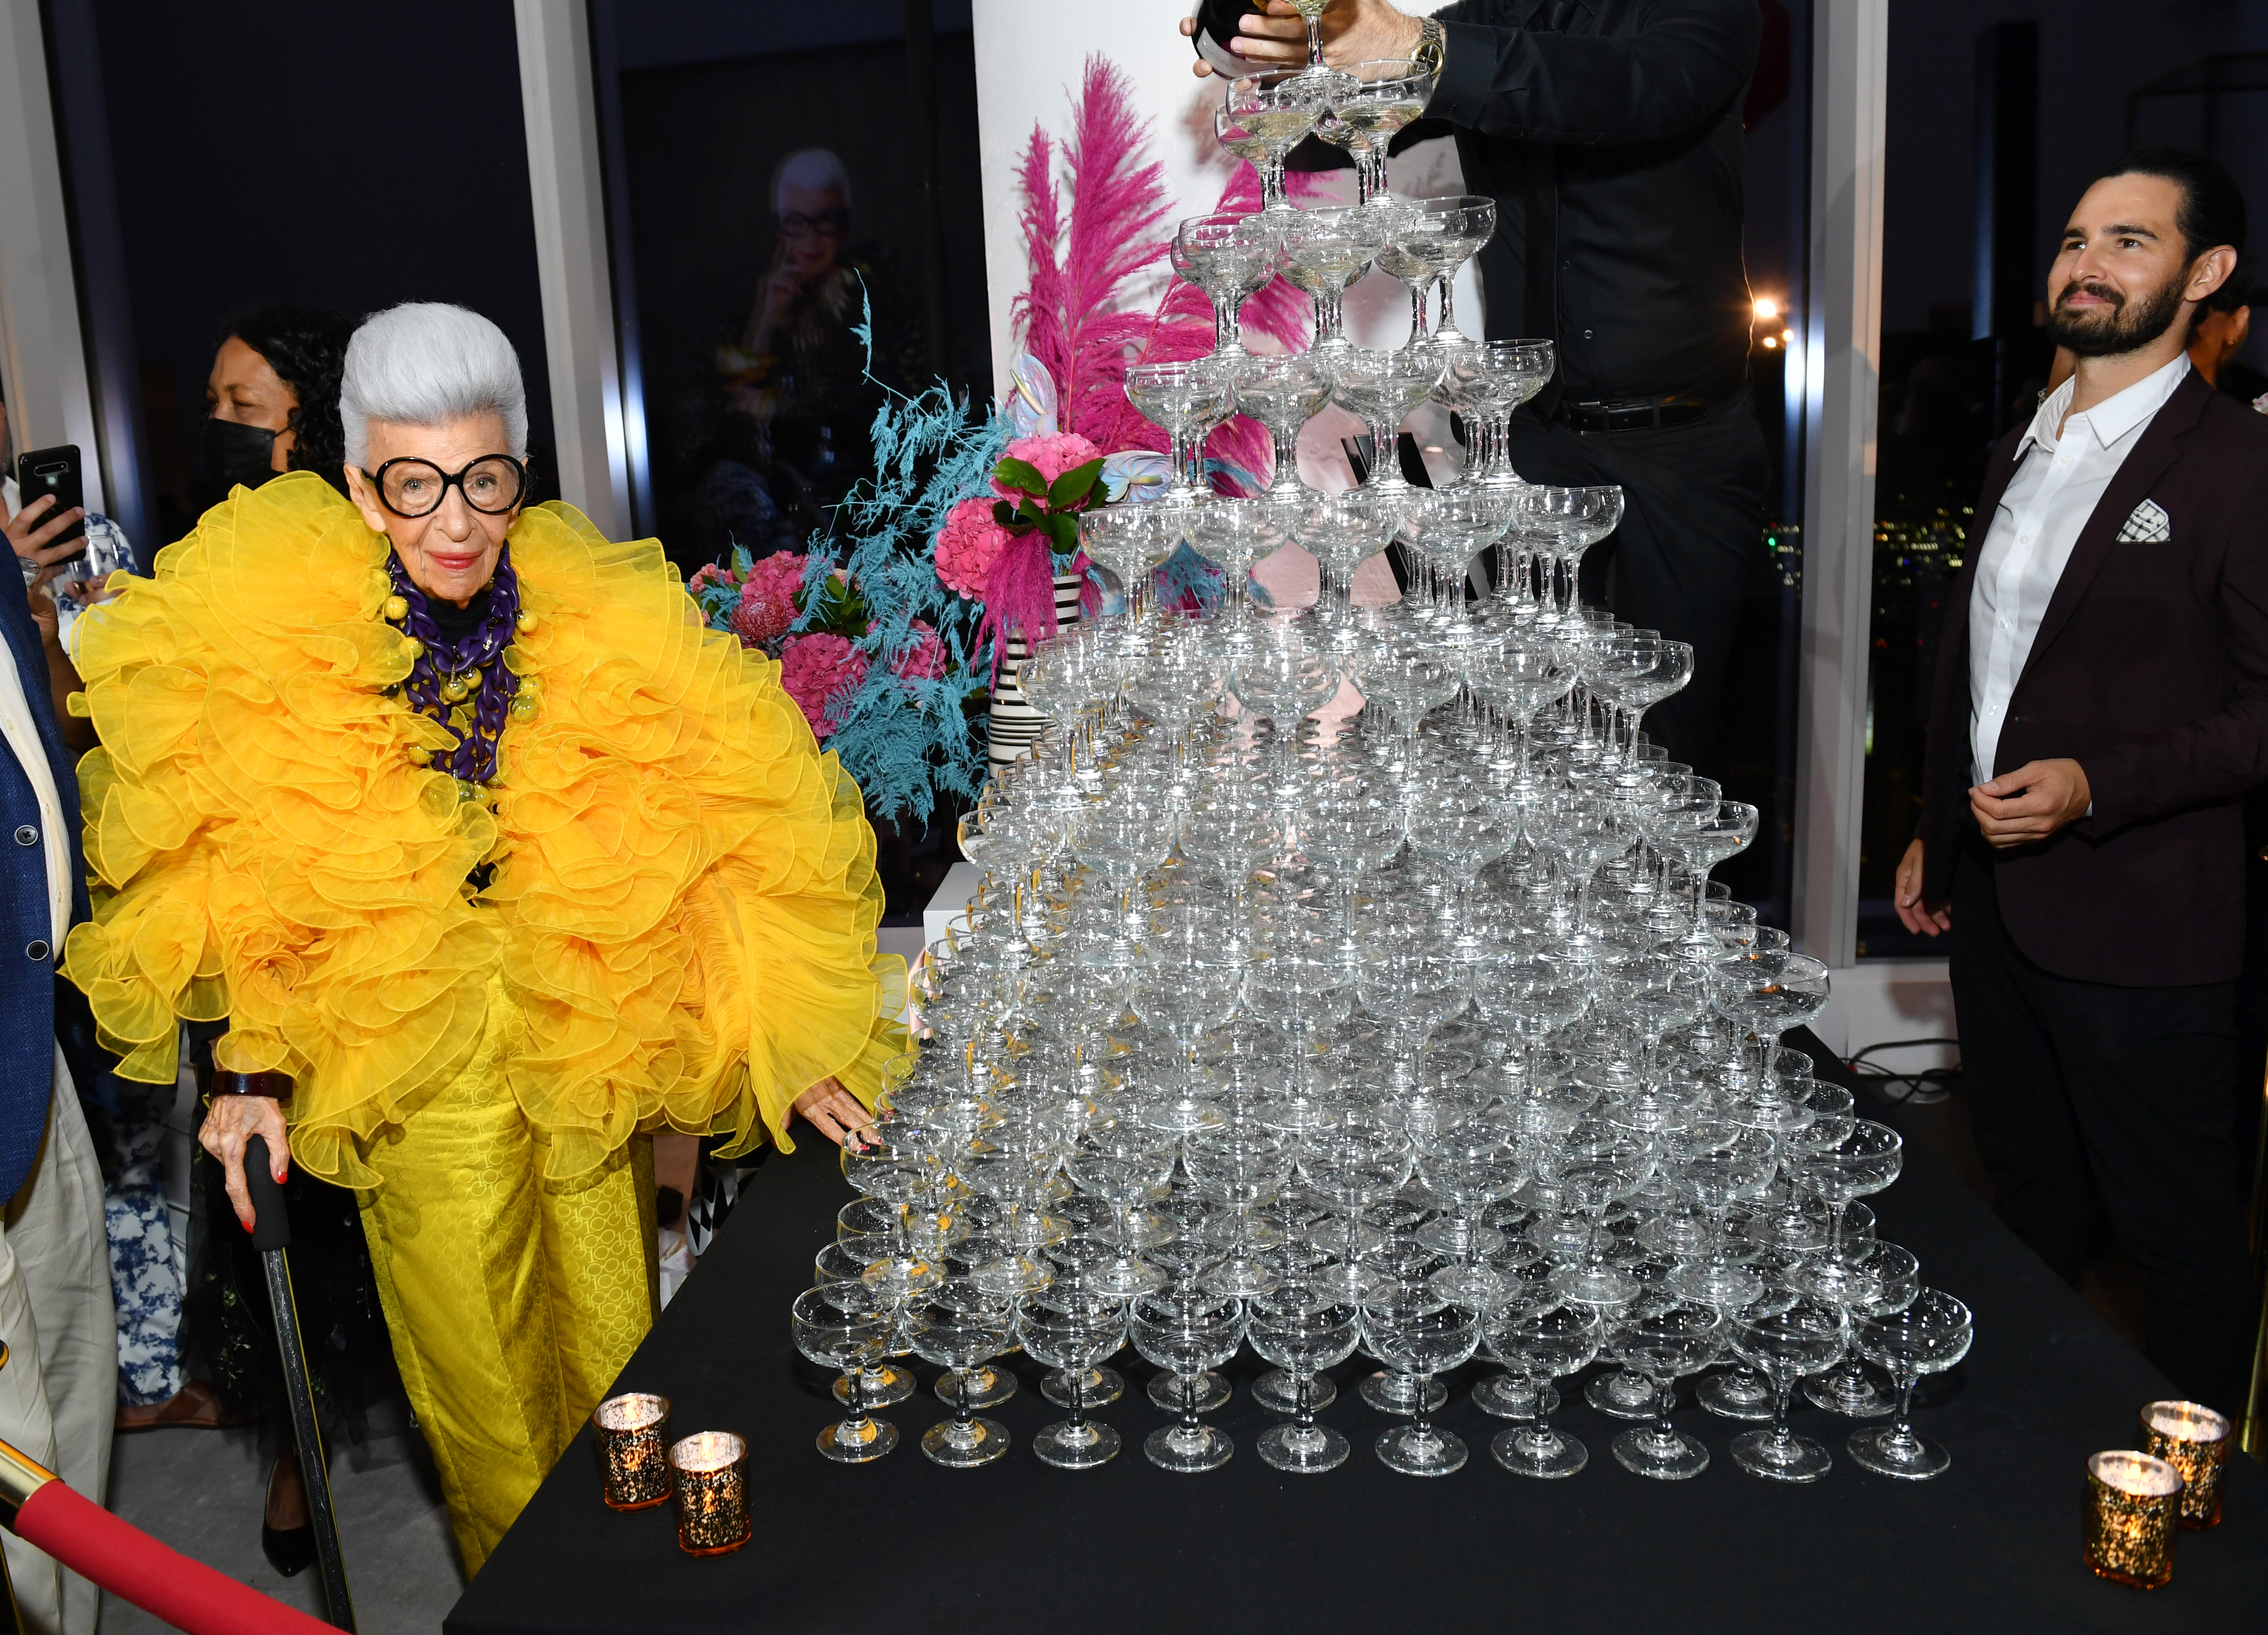 A photo of Iris Apfel at her 100th birthday party